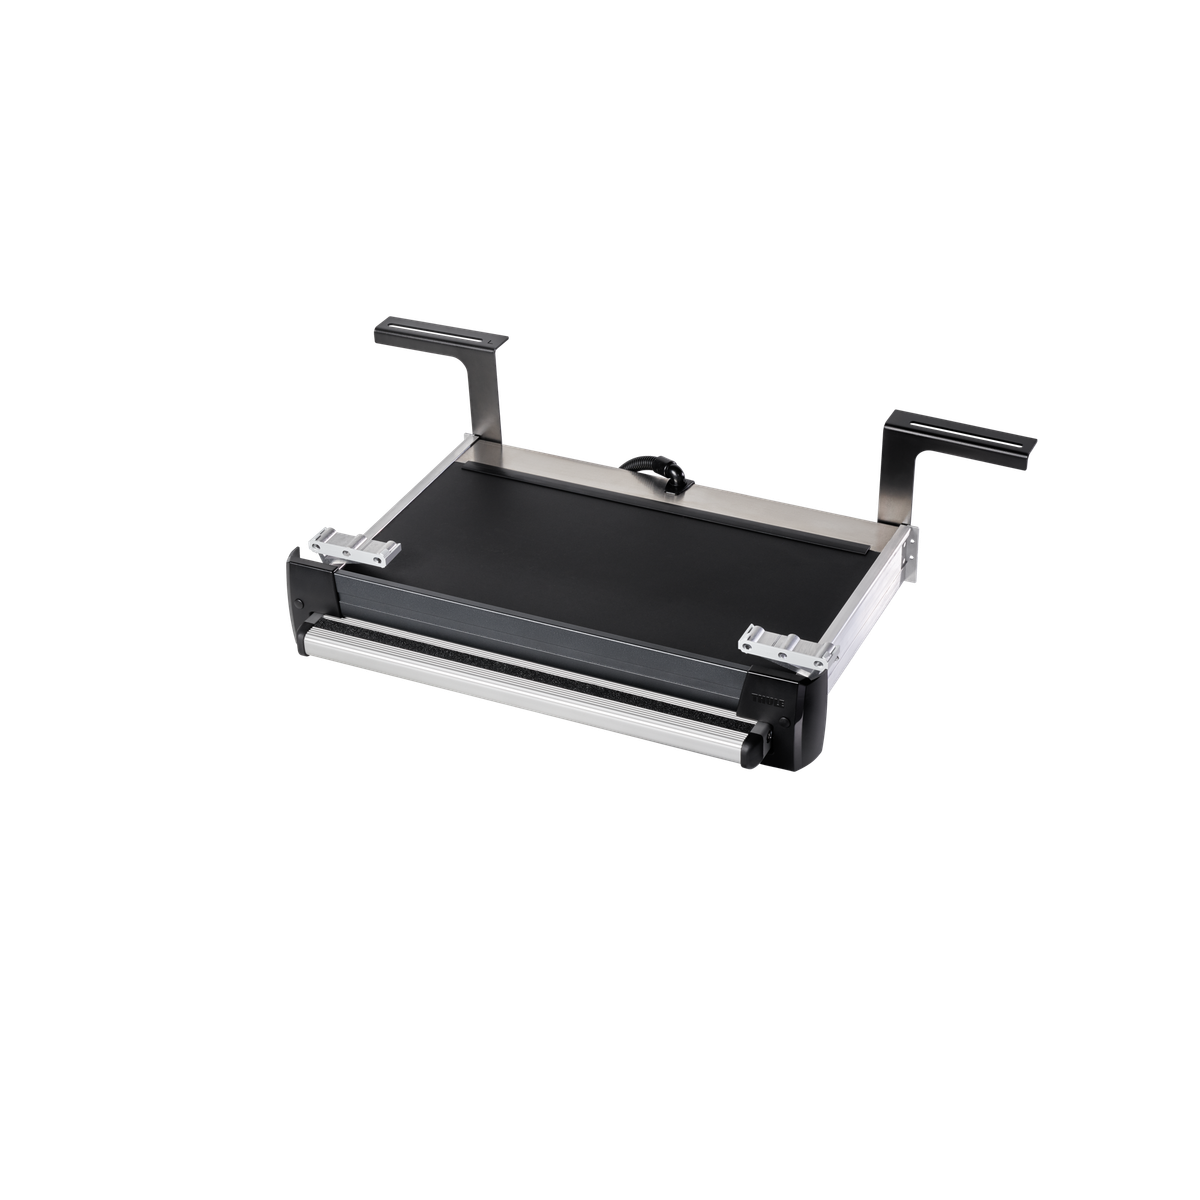 Thule Slide-Out Step G2 slide-out step 12V Crafter 2017 550 aluminium